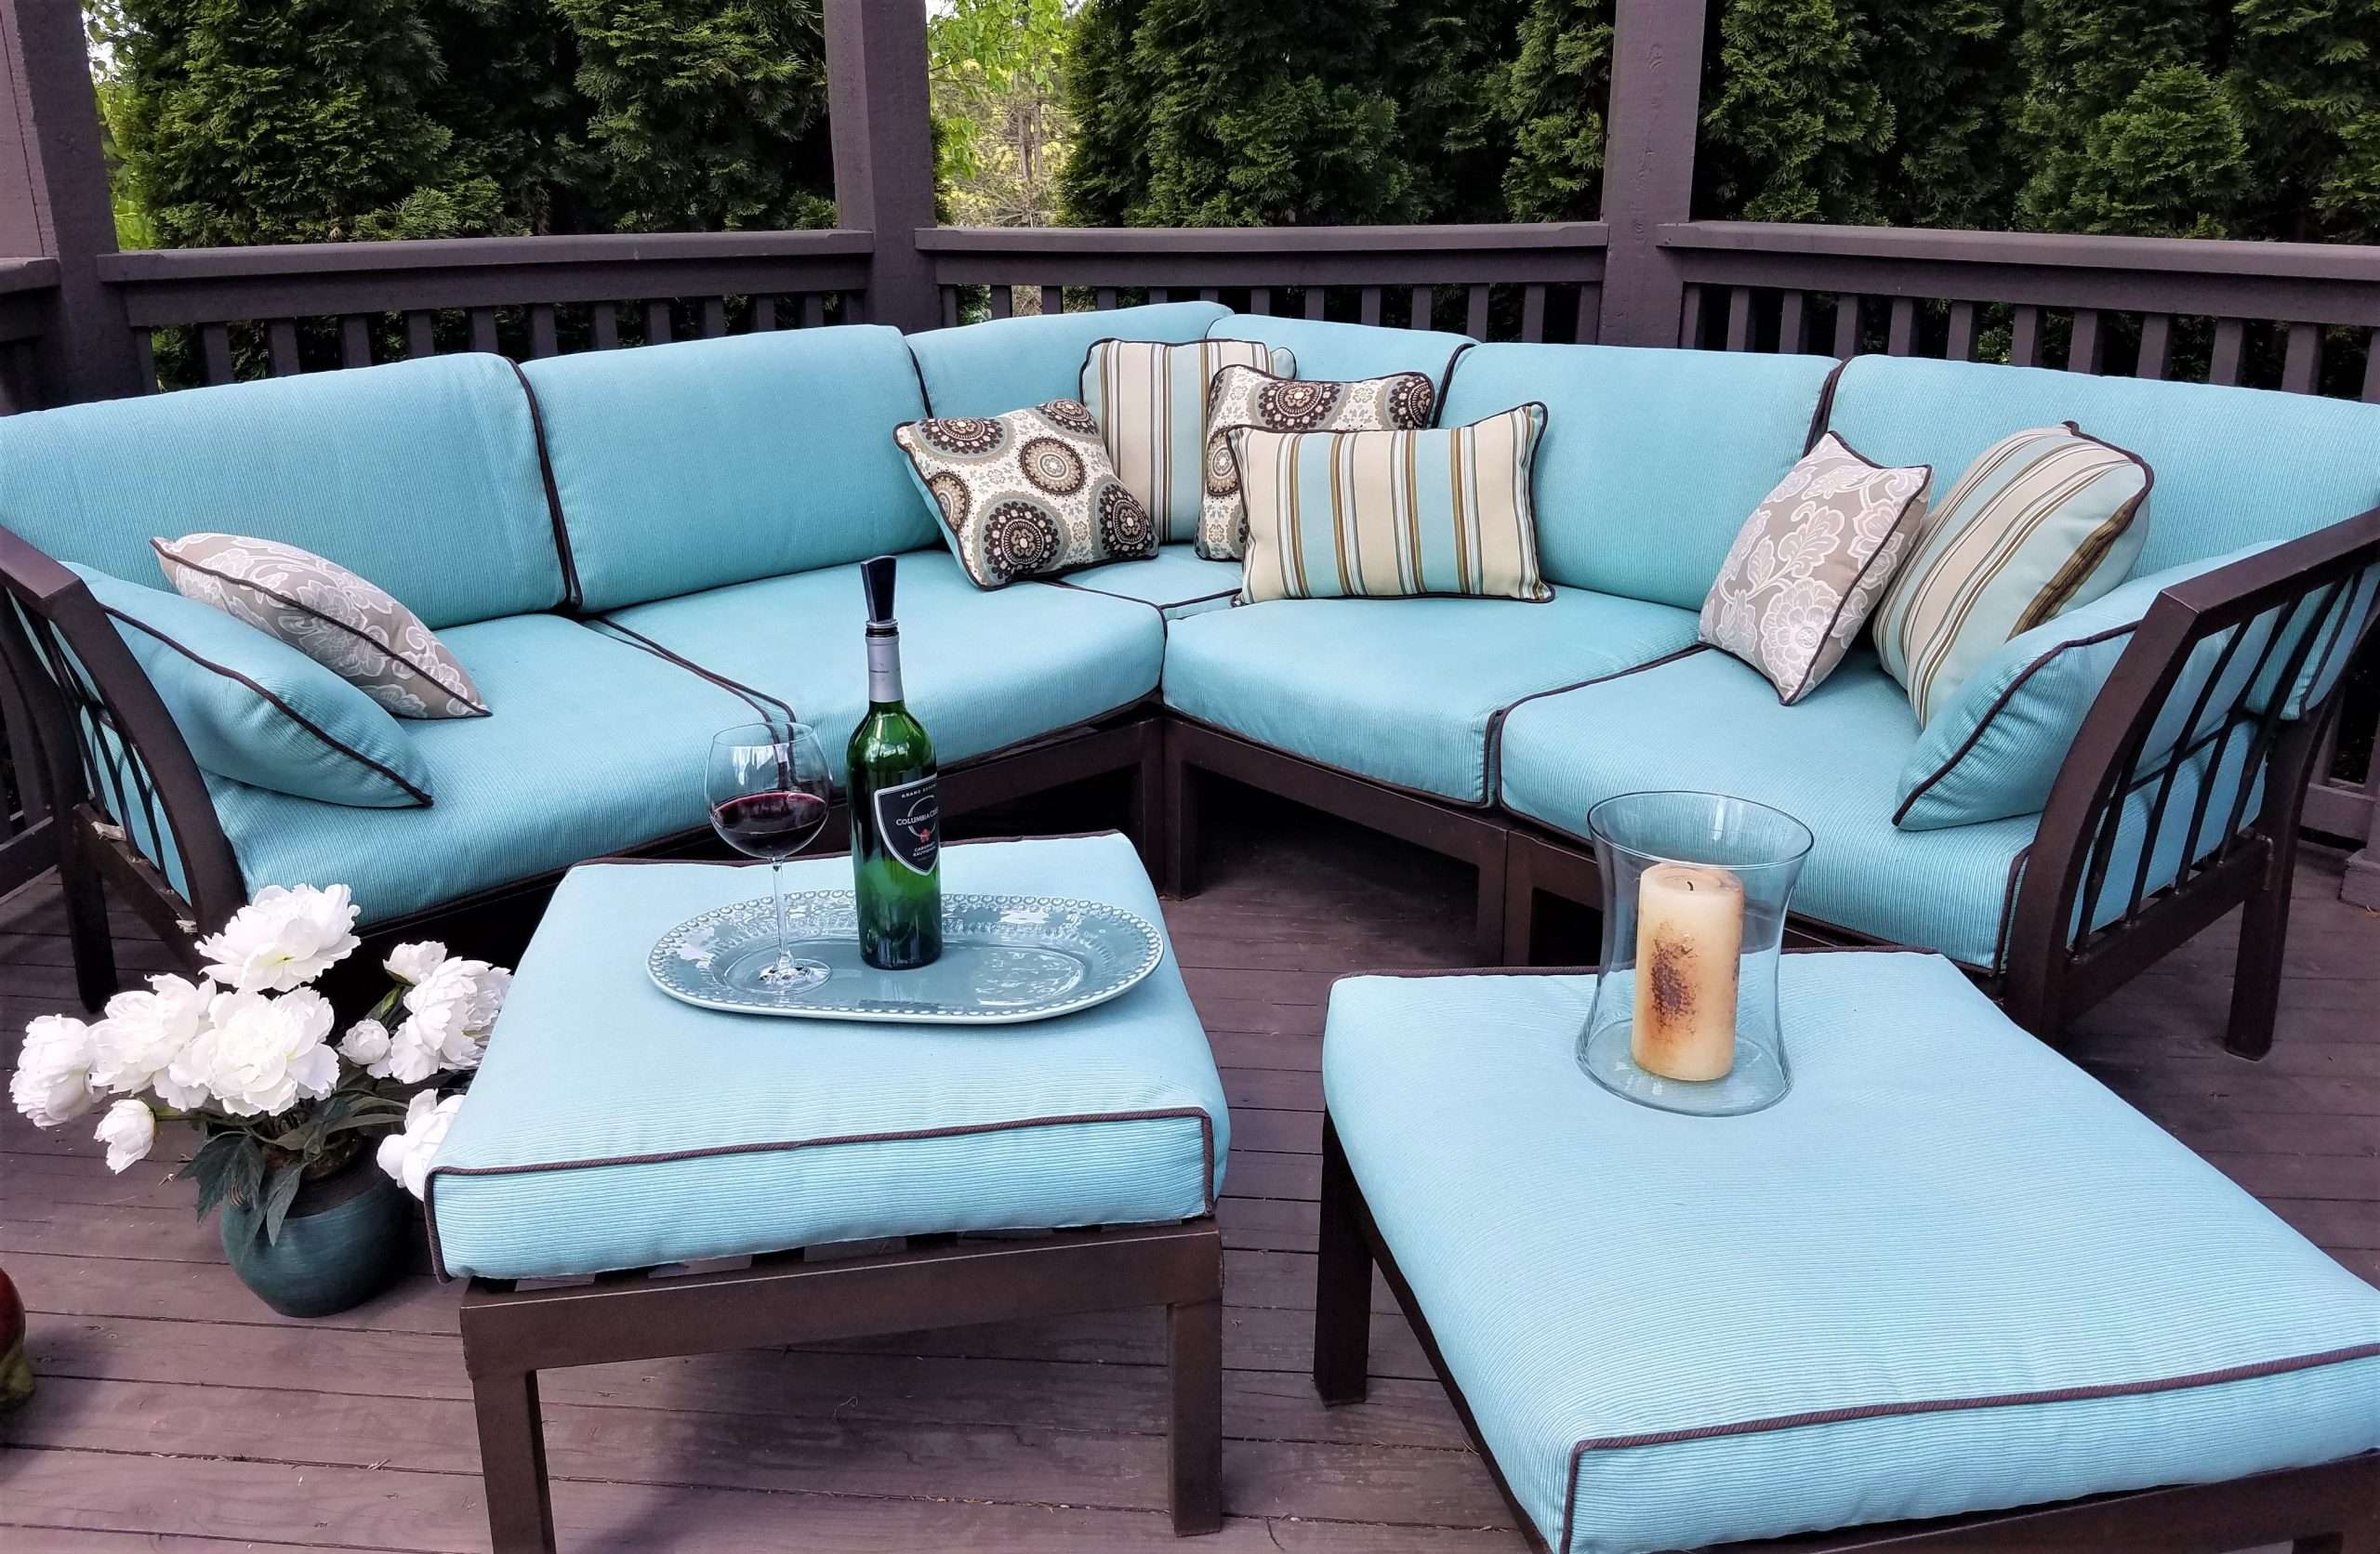 How to Reupholster or Recover Outdoor Patio Cushions ...